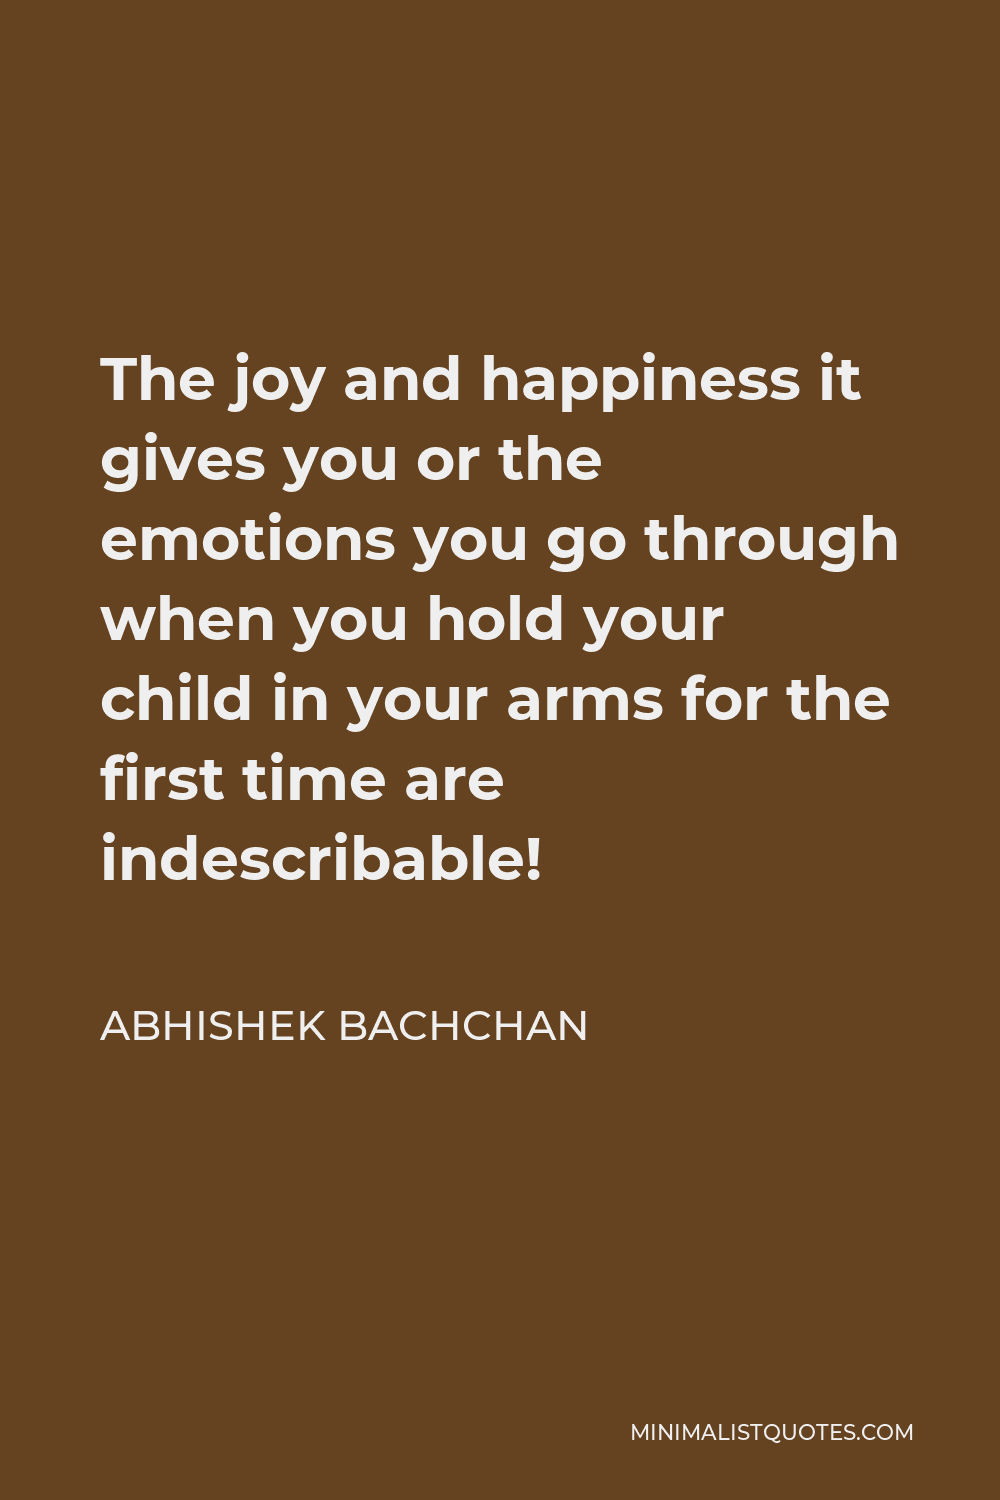 Abhishek Bachchan Quote - The joy and happiness it gives you or the emotions you go through when you hold your child in your arms for the first time are indescribable!